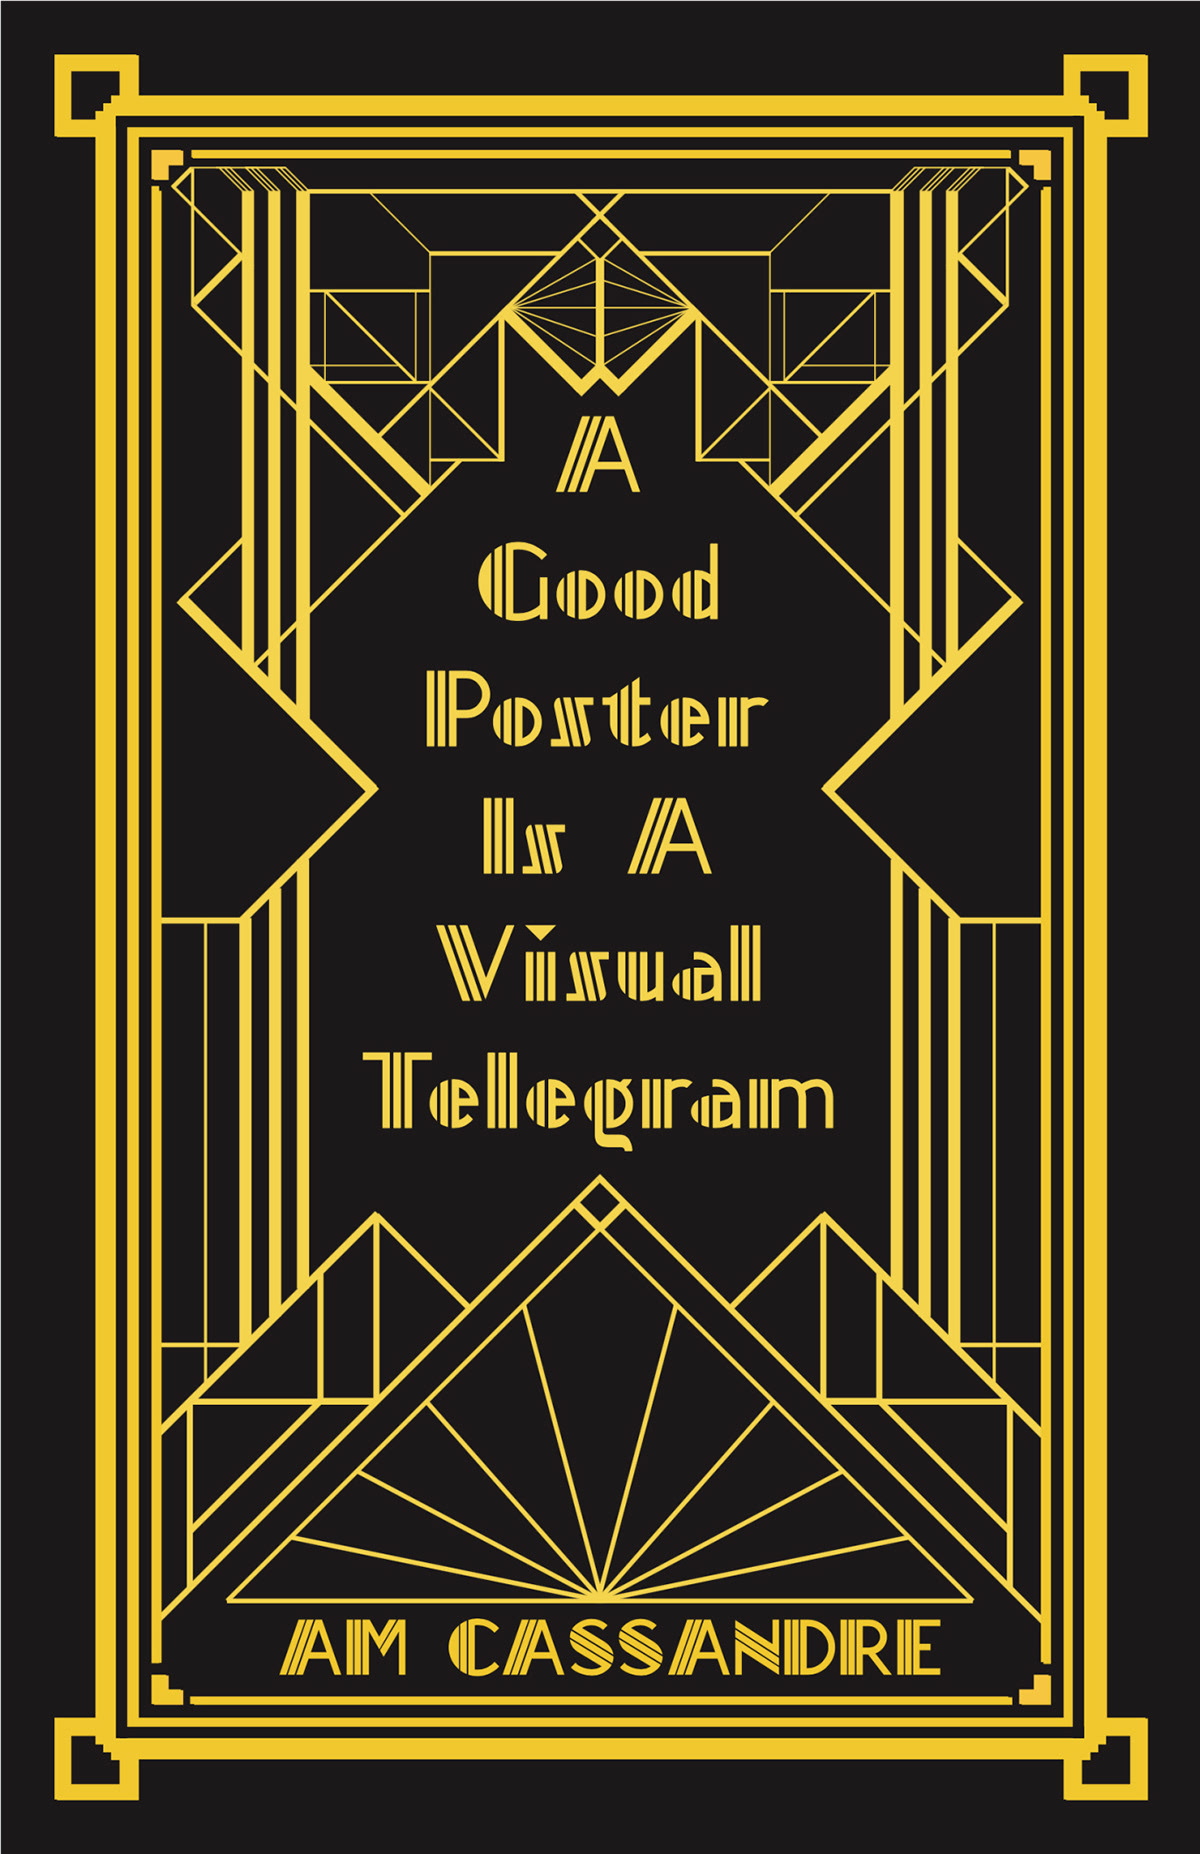 poster quote art deco gold black geometric lines mirrored pattern